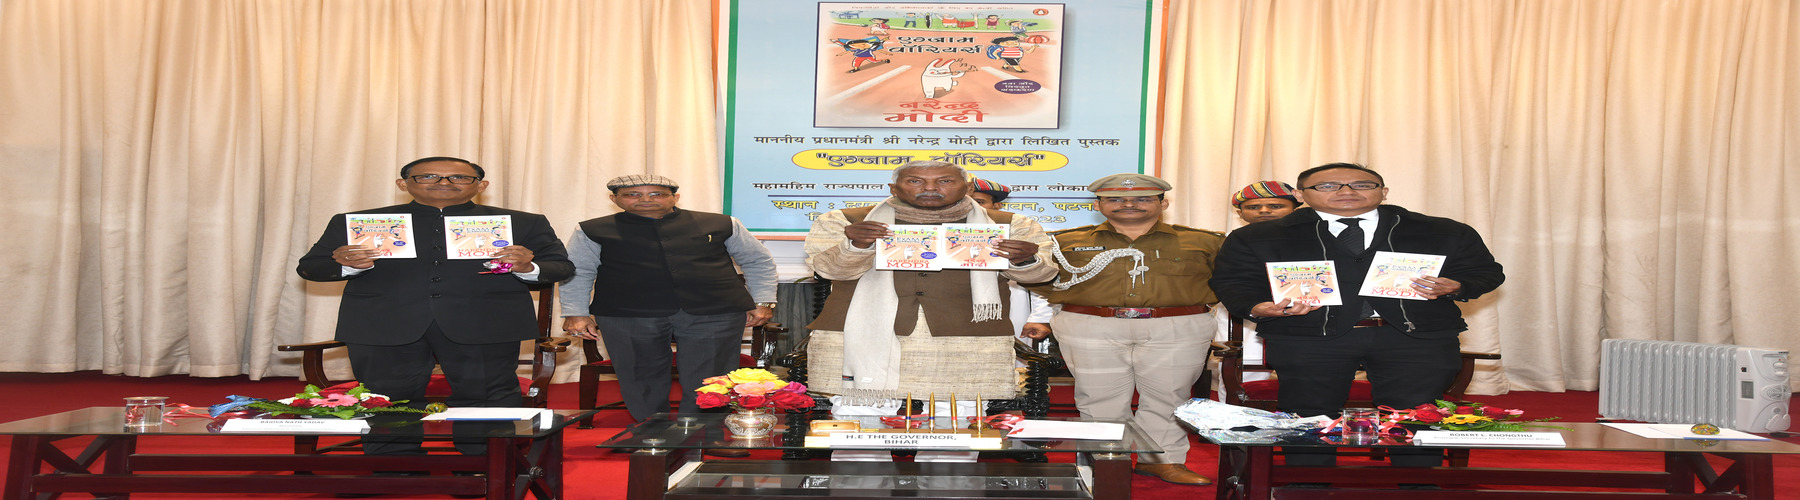 His Excellency unveiled the book Exam Warriors written by Honourable Prime Minister on 19/01/2023.